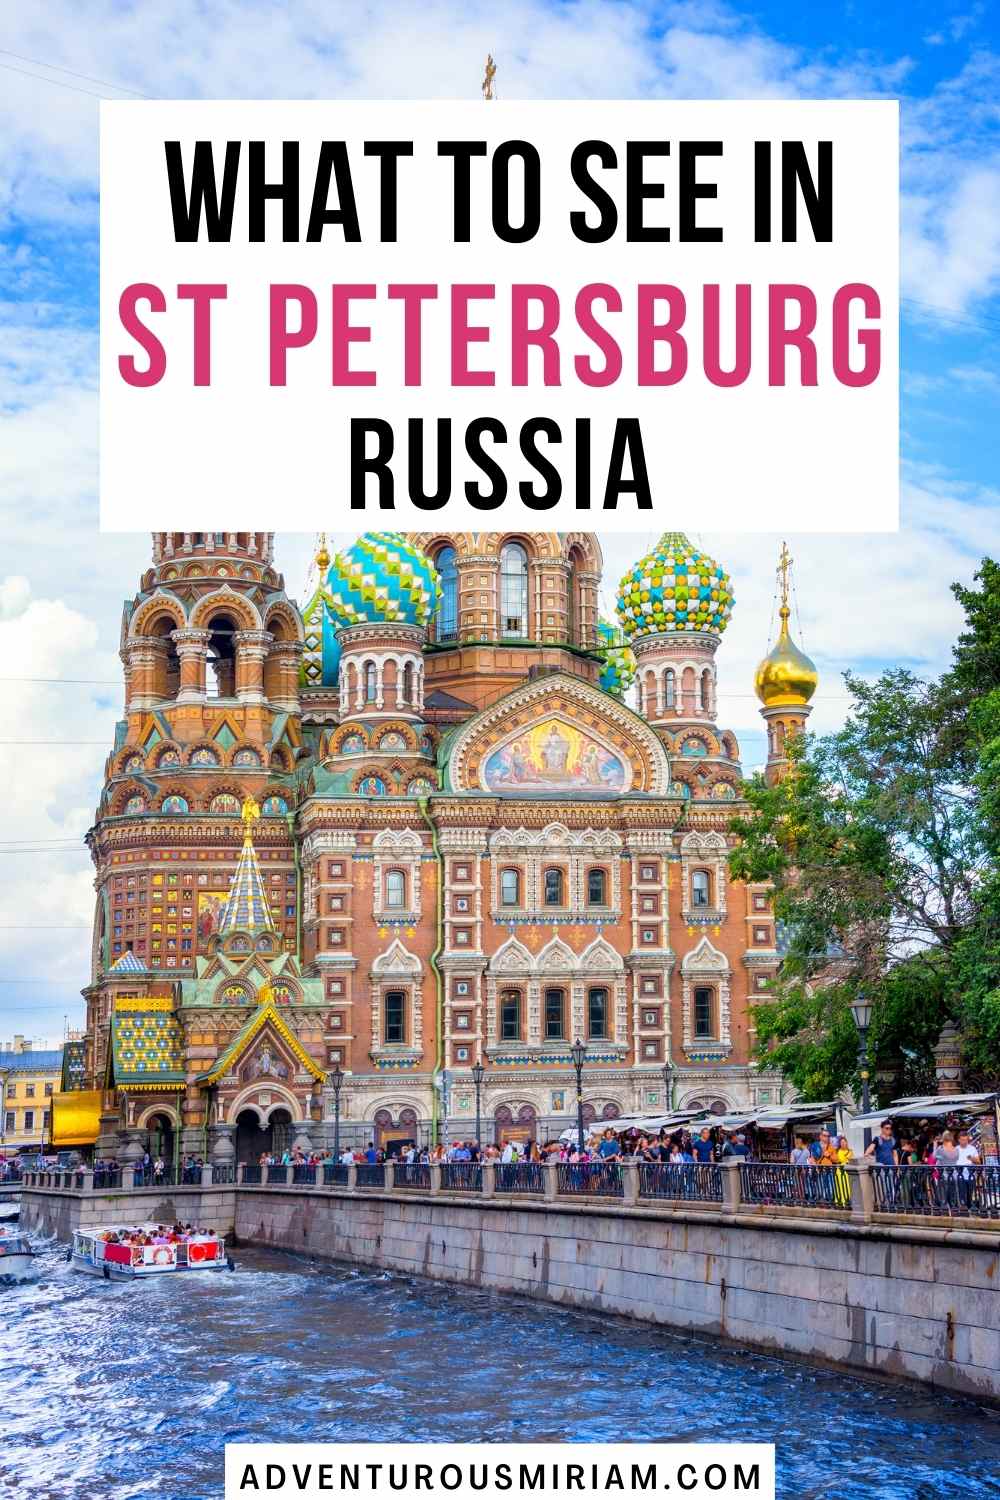 Are you heading to Russia and wondering what to expect? Here's what you need to know + the top things to see and do in St. Petersburg, Russia. st petersburg travel blog. what to do in st petersburg russia. places to visit in st petersburg. st petersburg travel. st petersburg russia vacations. where to go in saint petersburg. things to do in st petersburg russia. st petersburg russia travel tips. st petersburg russia attractions. what to see in st. petersburg. st petersburg russia things to do. st petersburg russia points of interest.